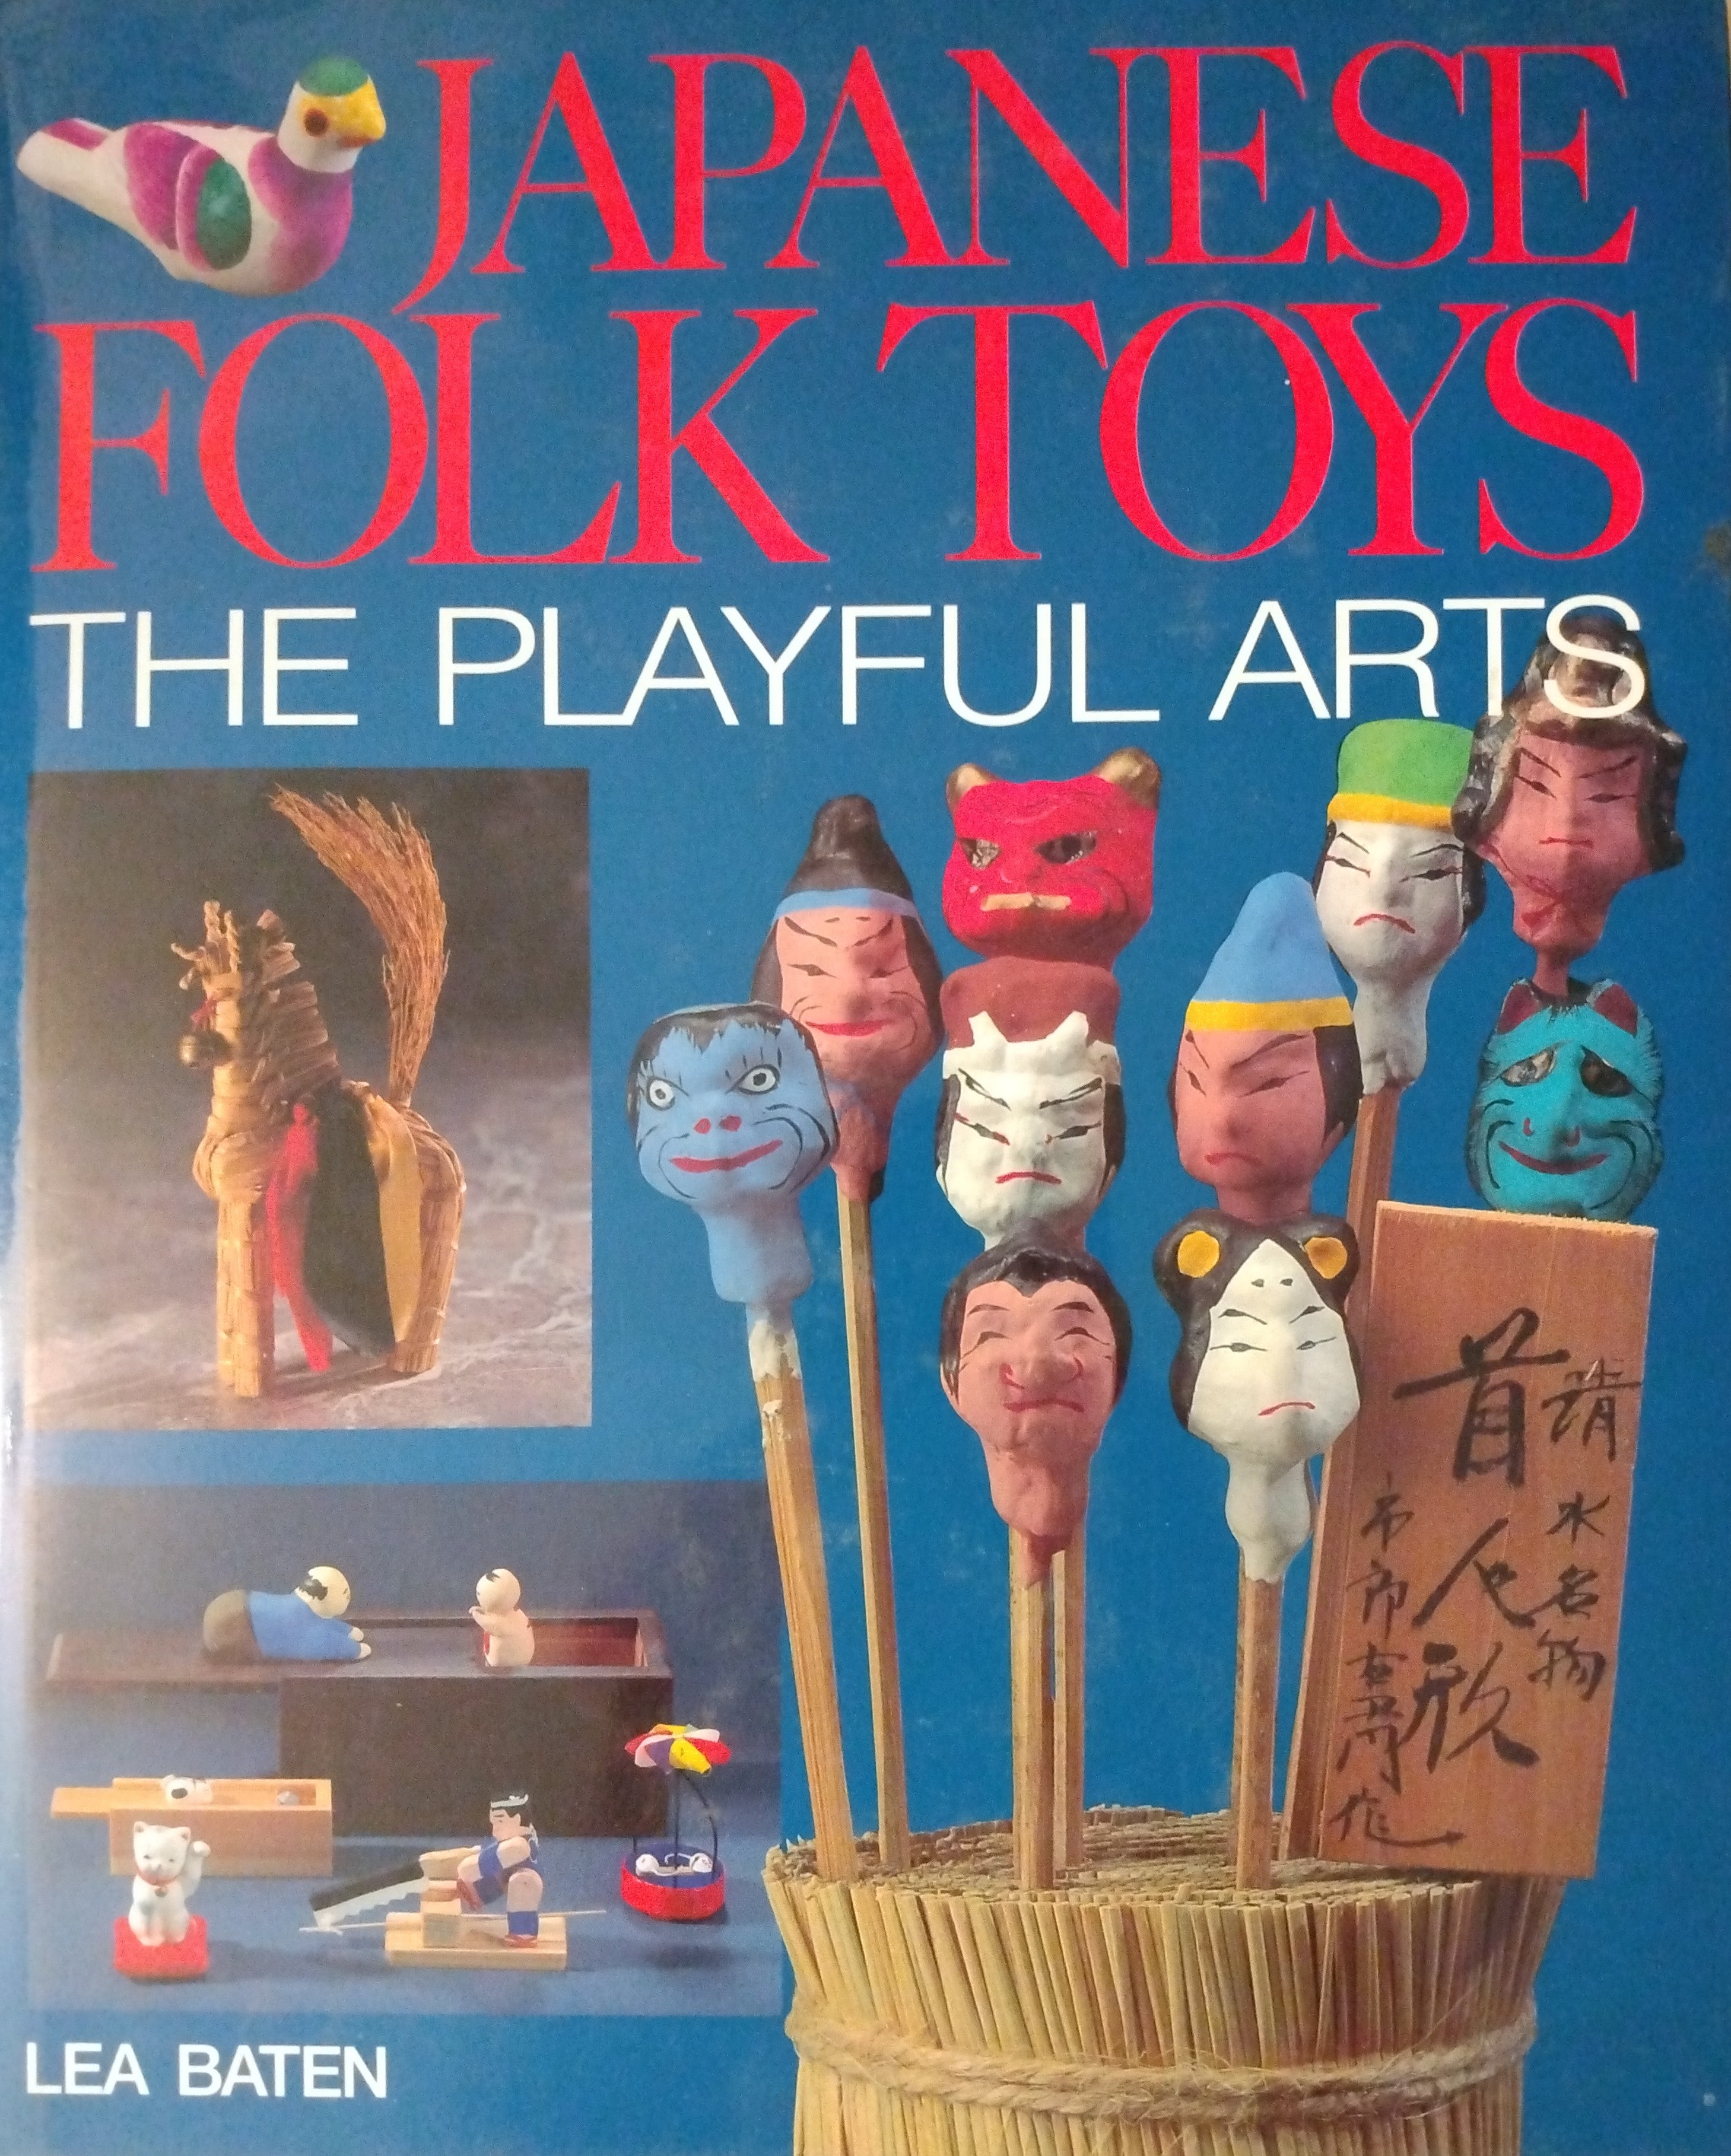 "Japanese Folk Toys: The Playful Arts", by Lea Baten; Thiel Collection